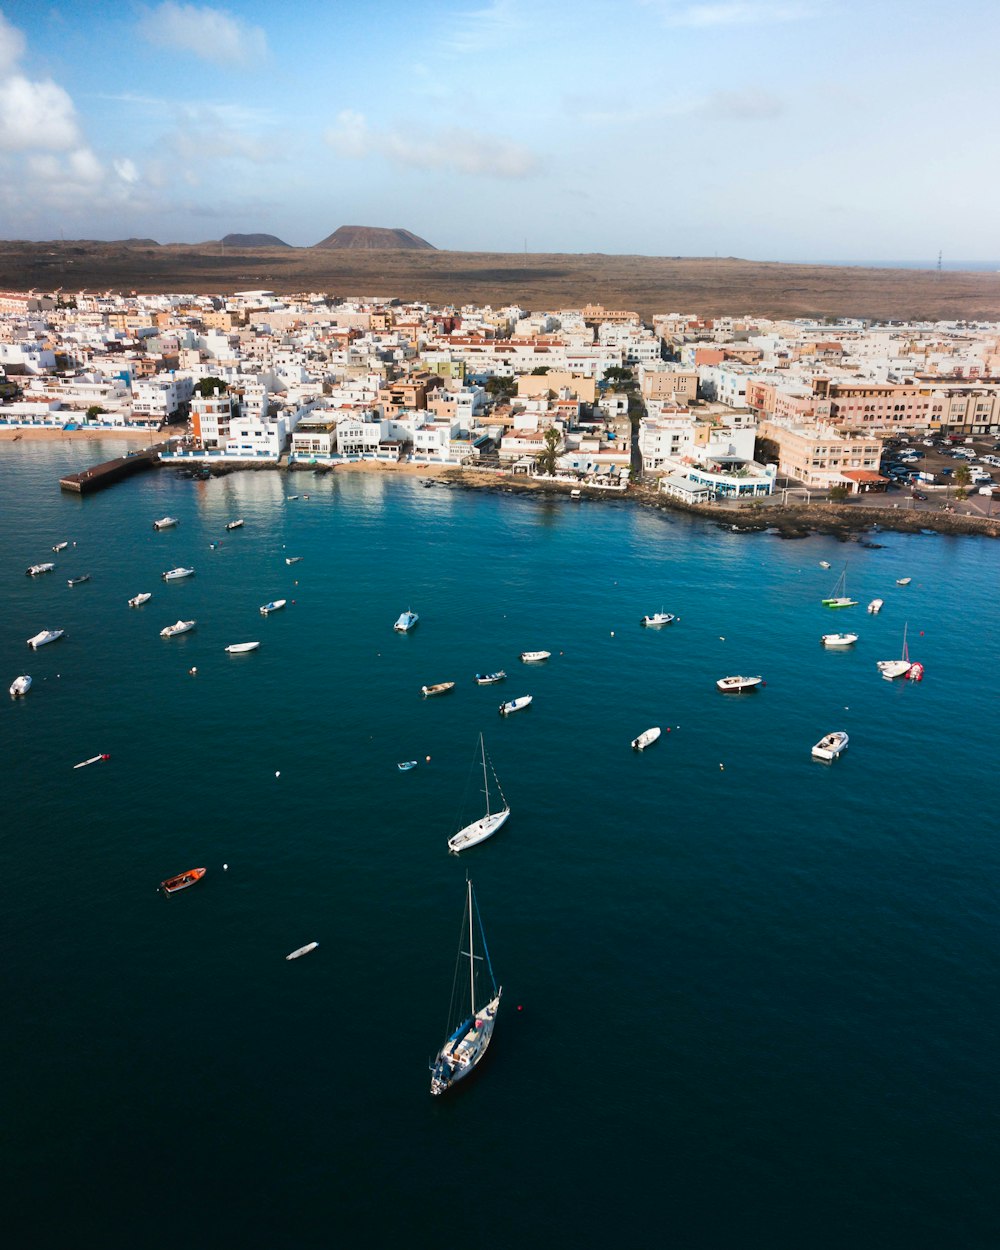 aerial view of boats on sea near city during daytime